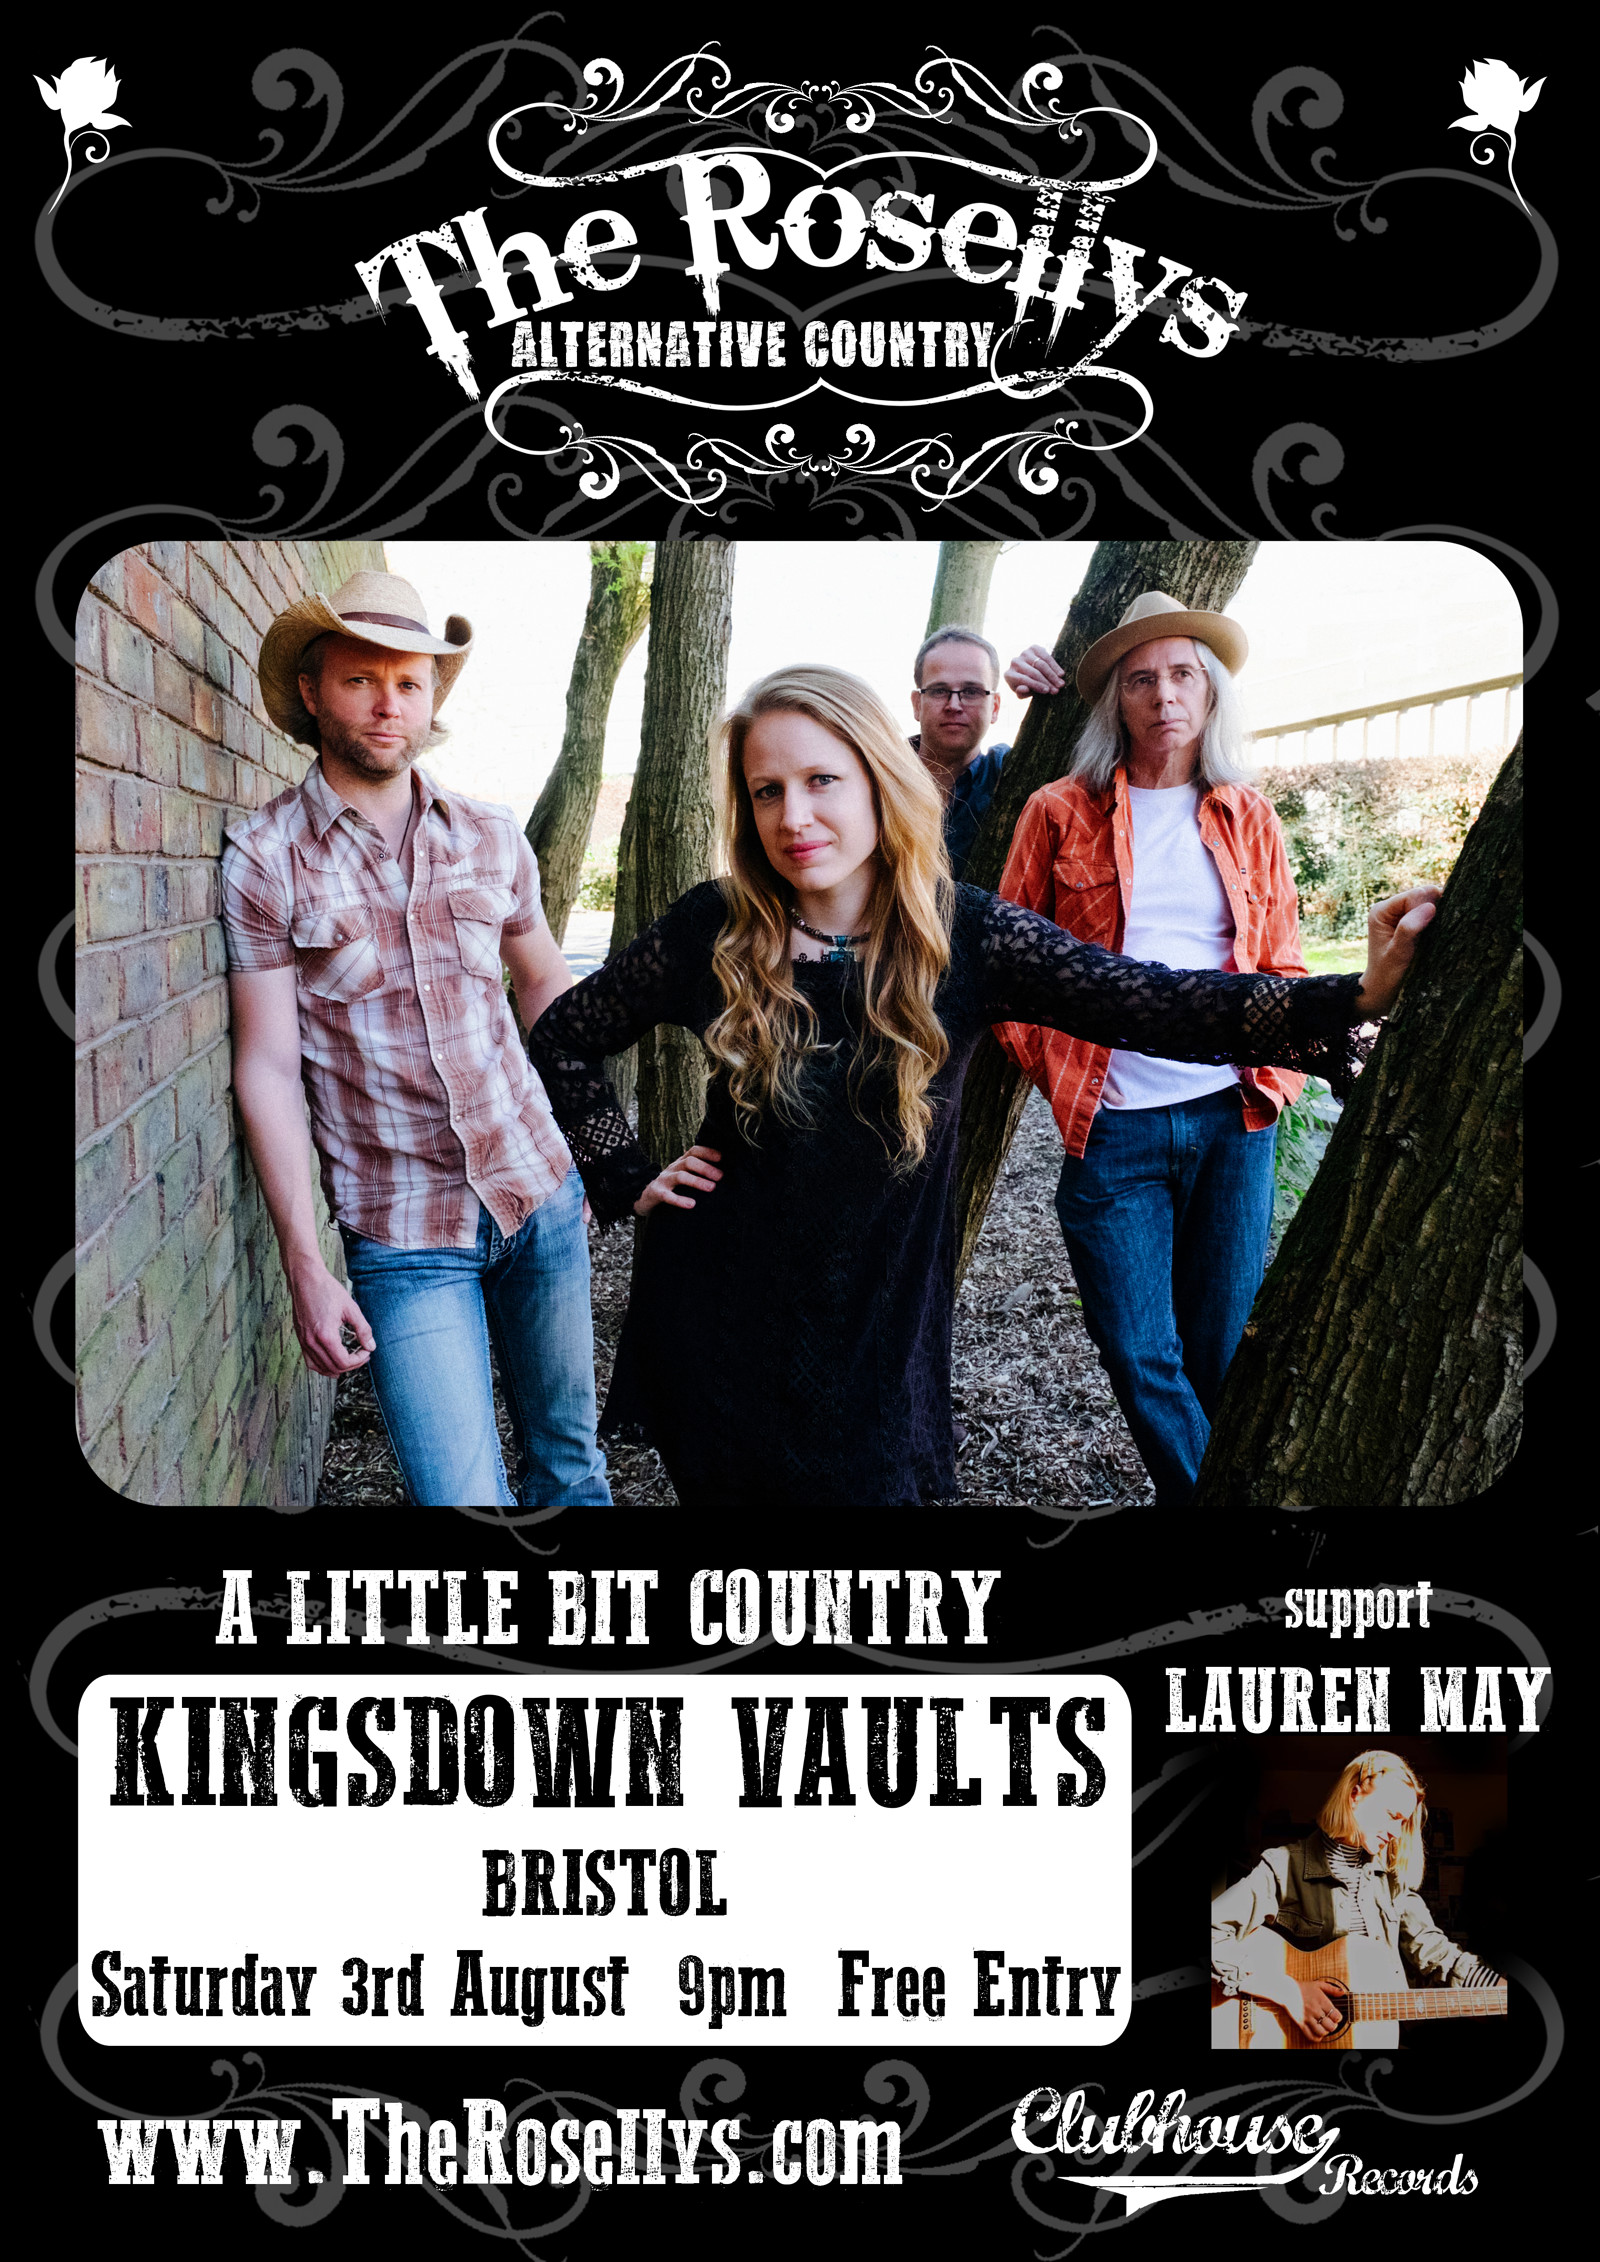 The Rosellys plus support from Lauren May at Kingsdown Vaults